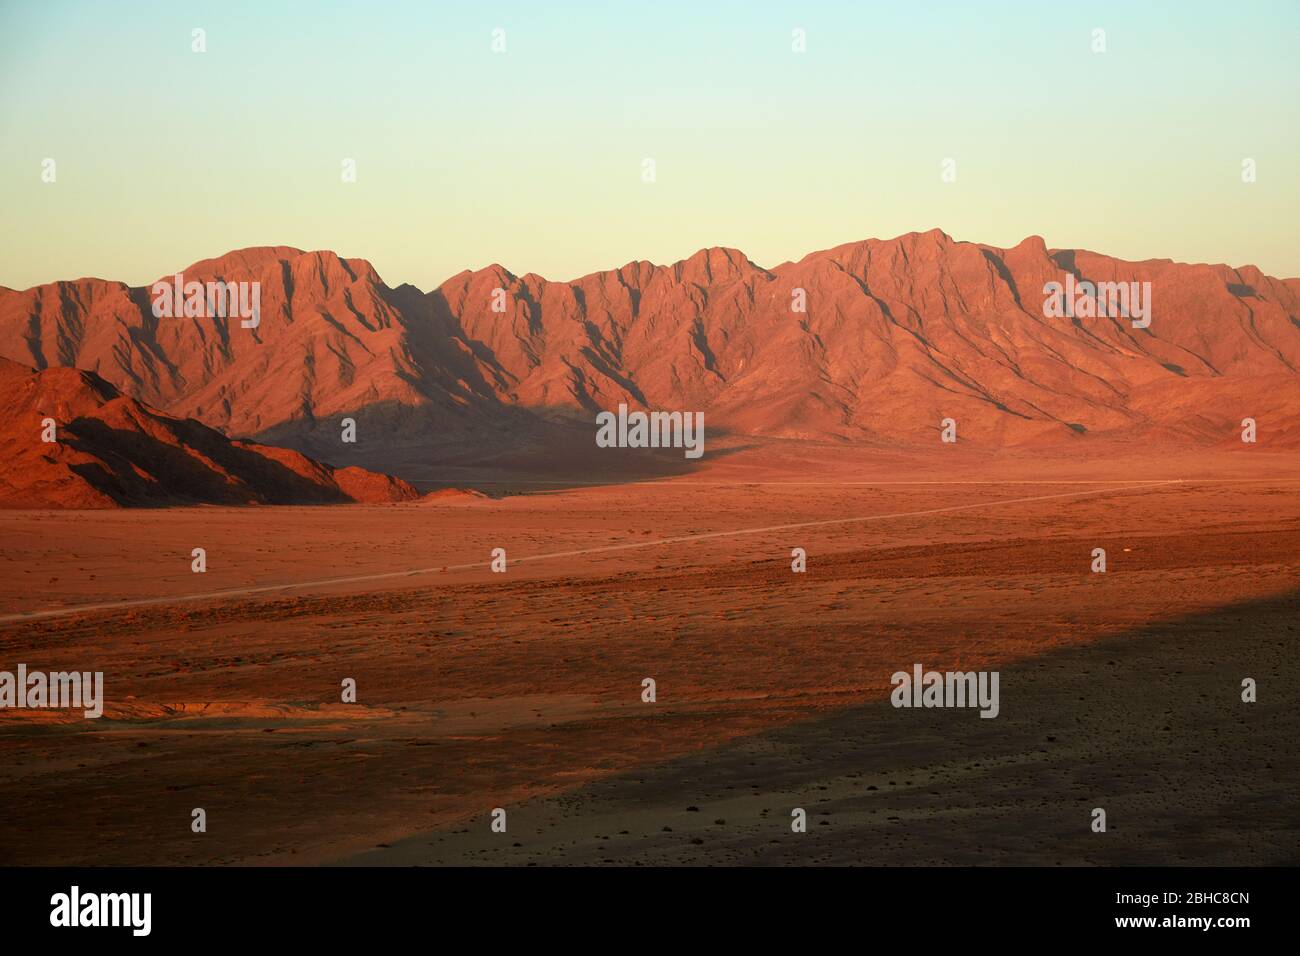 View of late light on plain and mountains from high on a rock koppie above Desert Camp, Sesriem, Namib Desert, Namibia, Africa Stock Photo